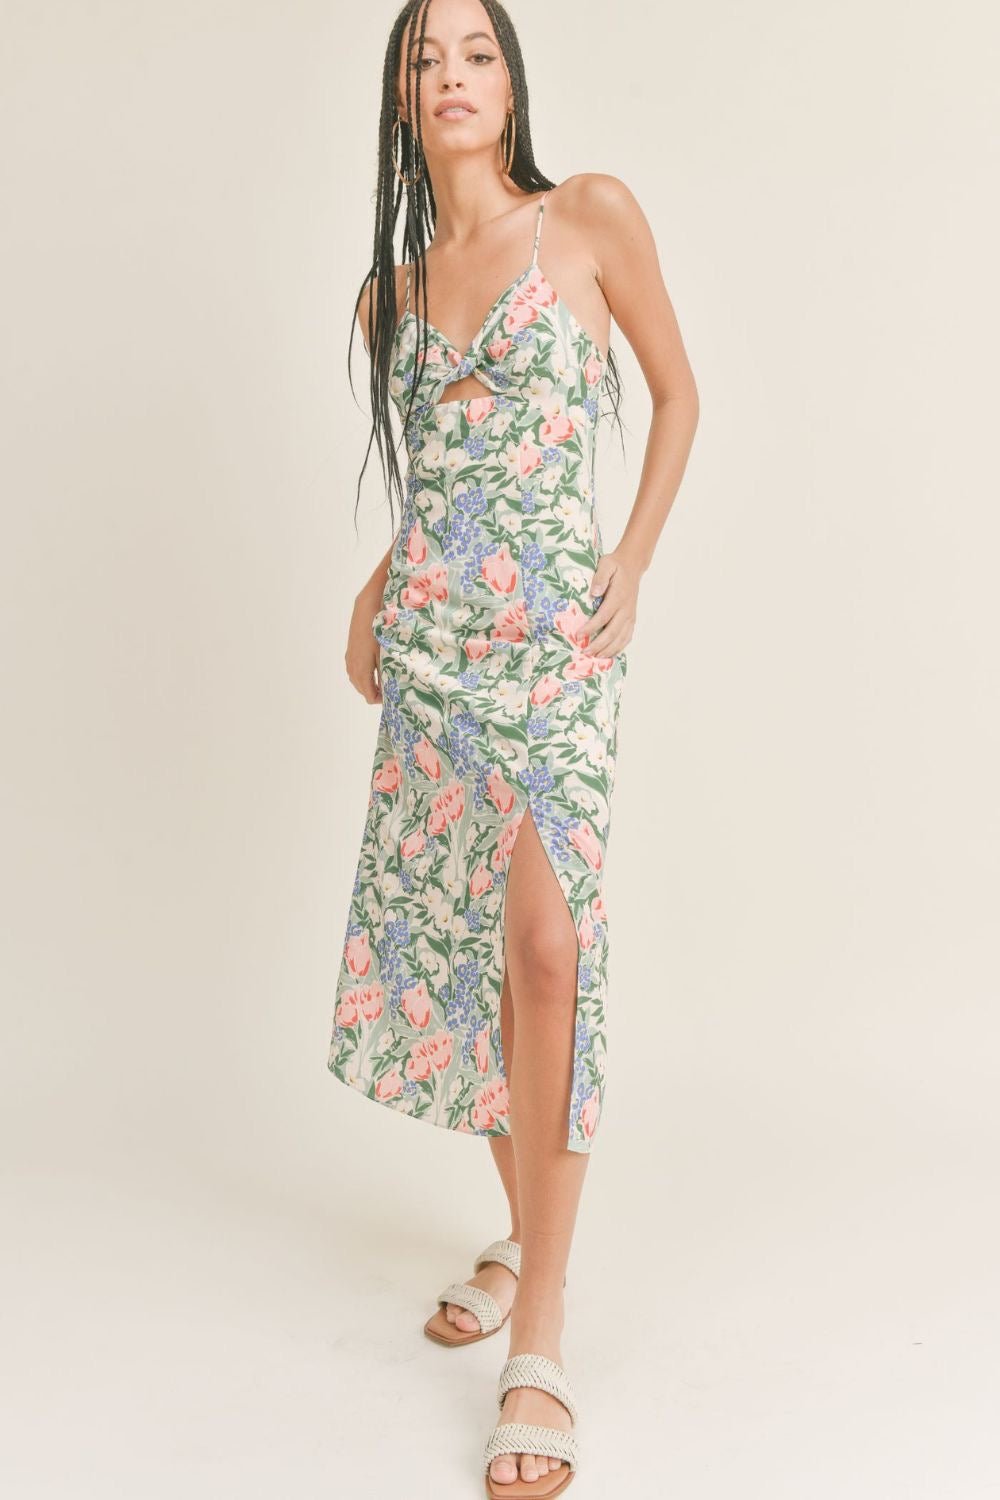 Sage The Label | Romantic Floral Midi Dress - Women&#39;s Dresses - Blooming Daily